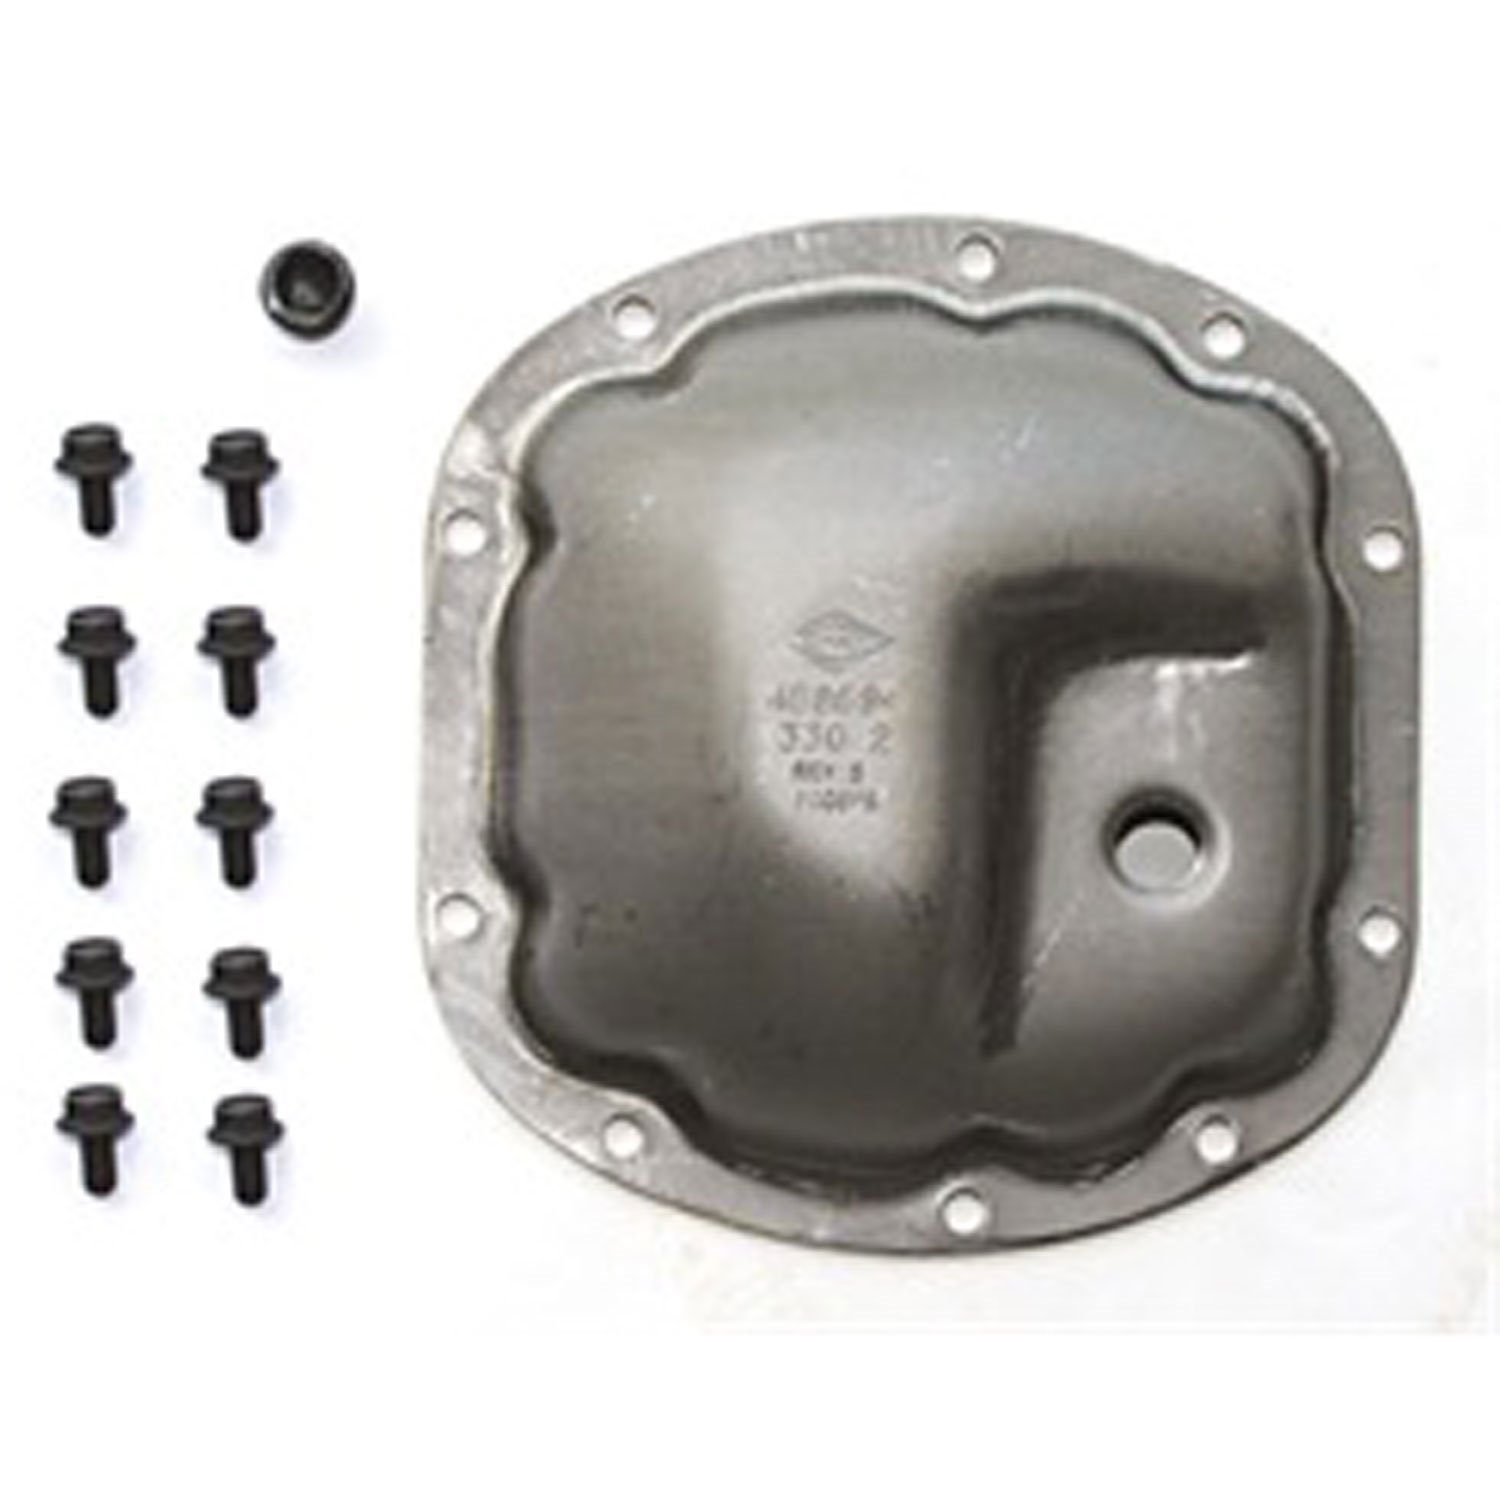 This differential cover from Omix-ADA fits Dana 30 low pinion front axles found in 93-07 Grand Cherokee and 97-07 Wrangler.